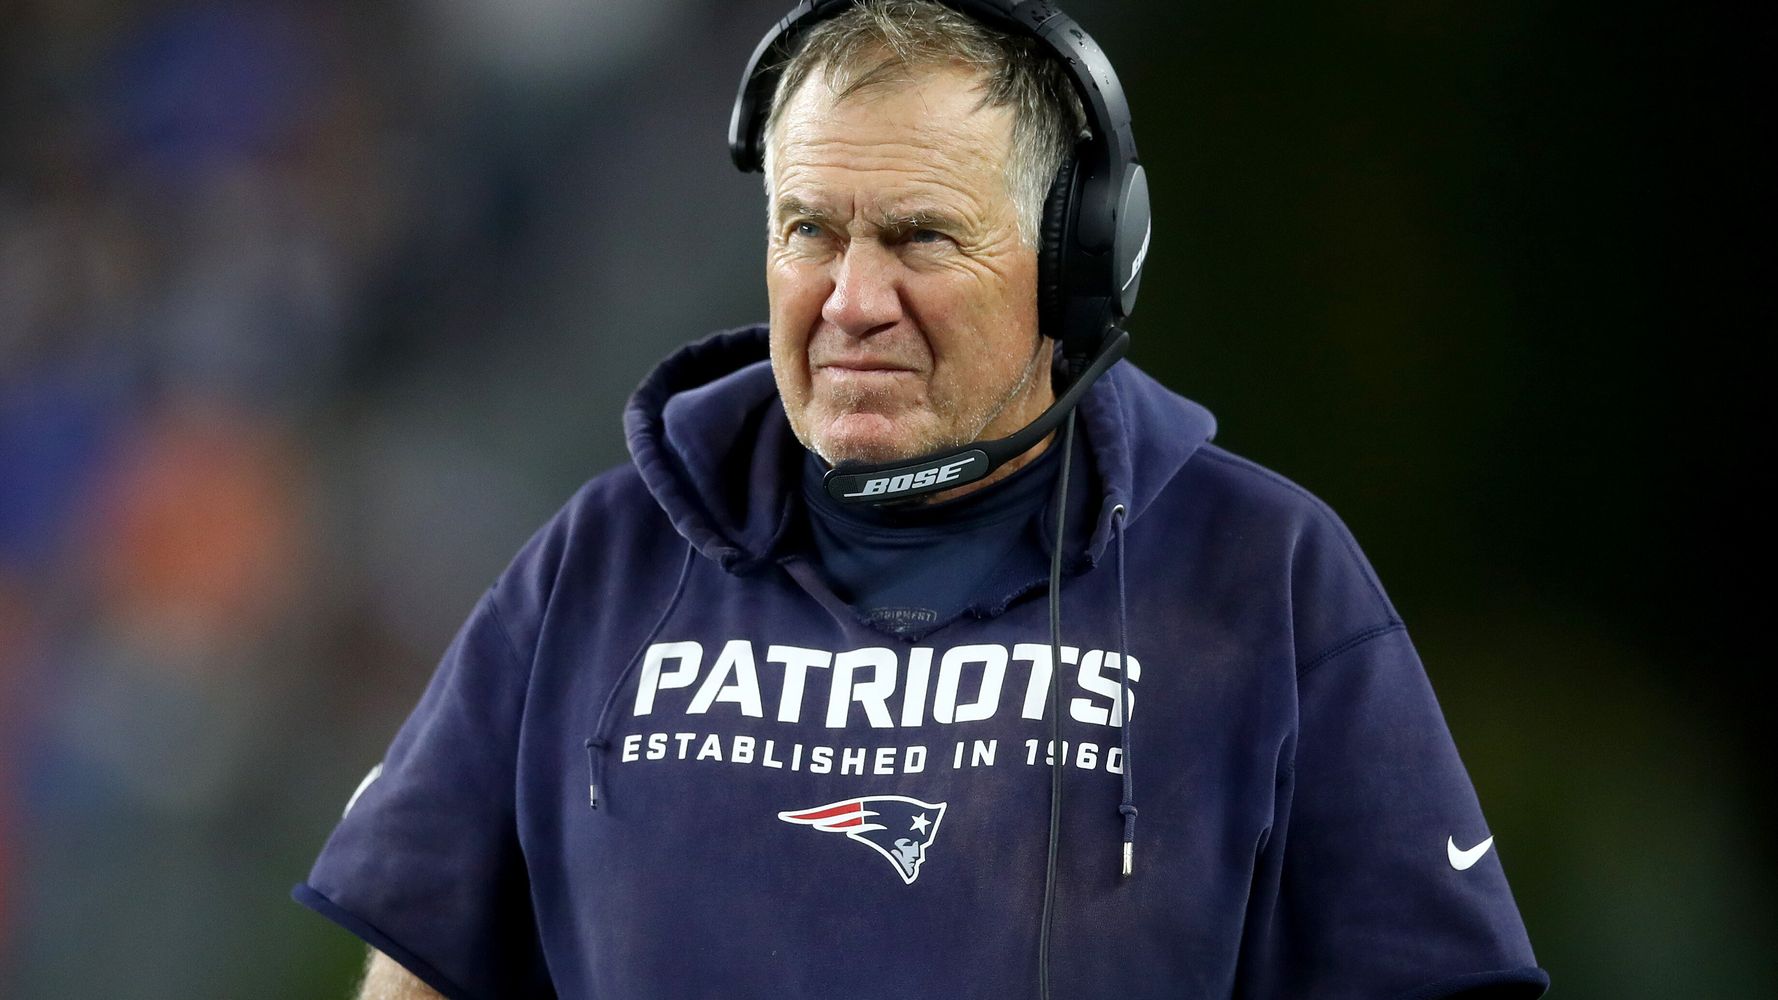 Bill Belichick's Oral Hygiene Fumble During Buccaneers-Patriots Game Disgusts Fans